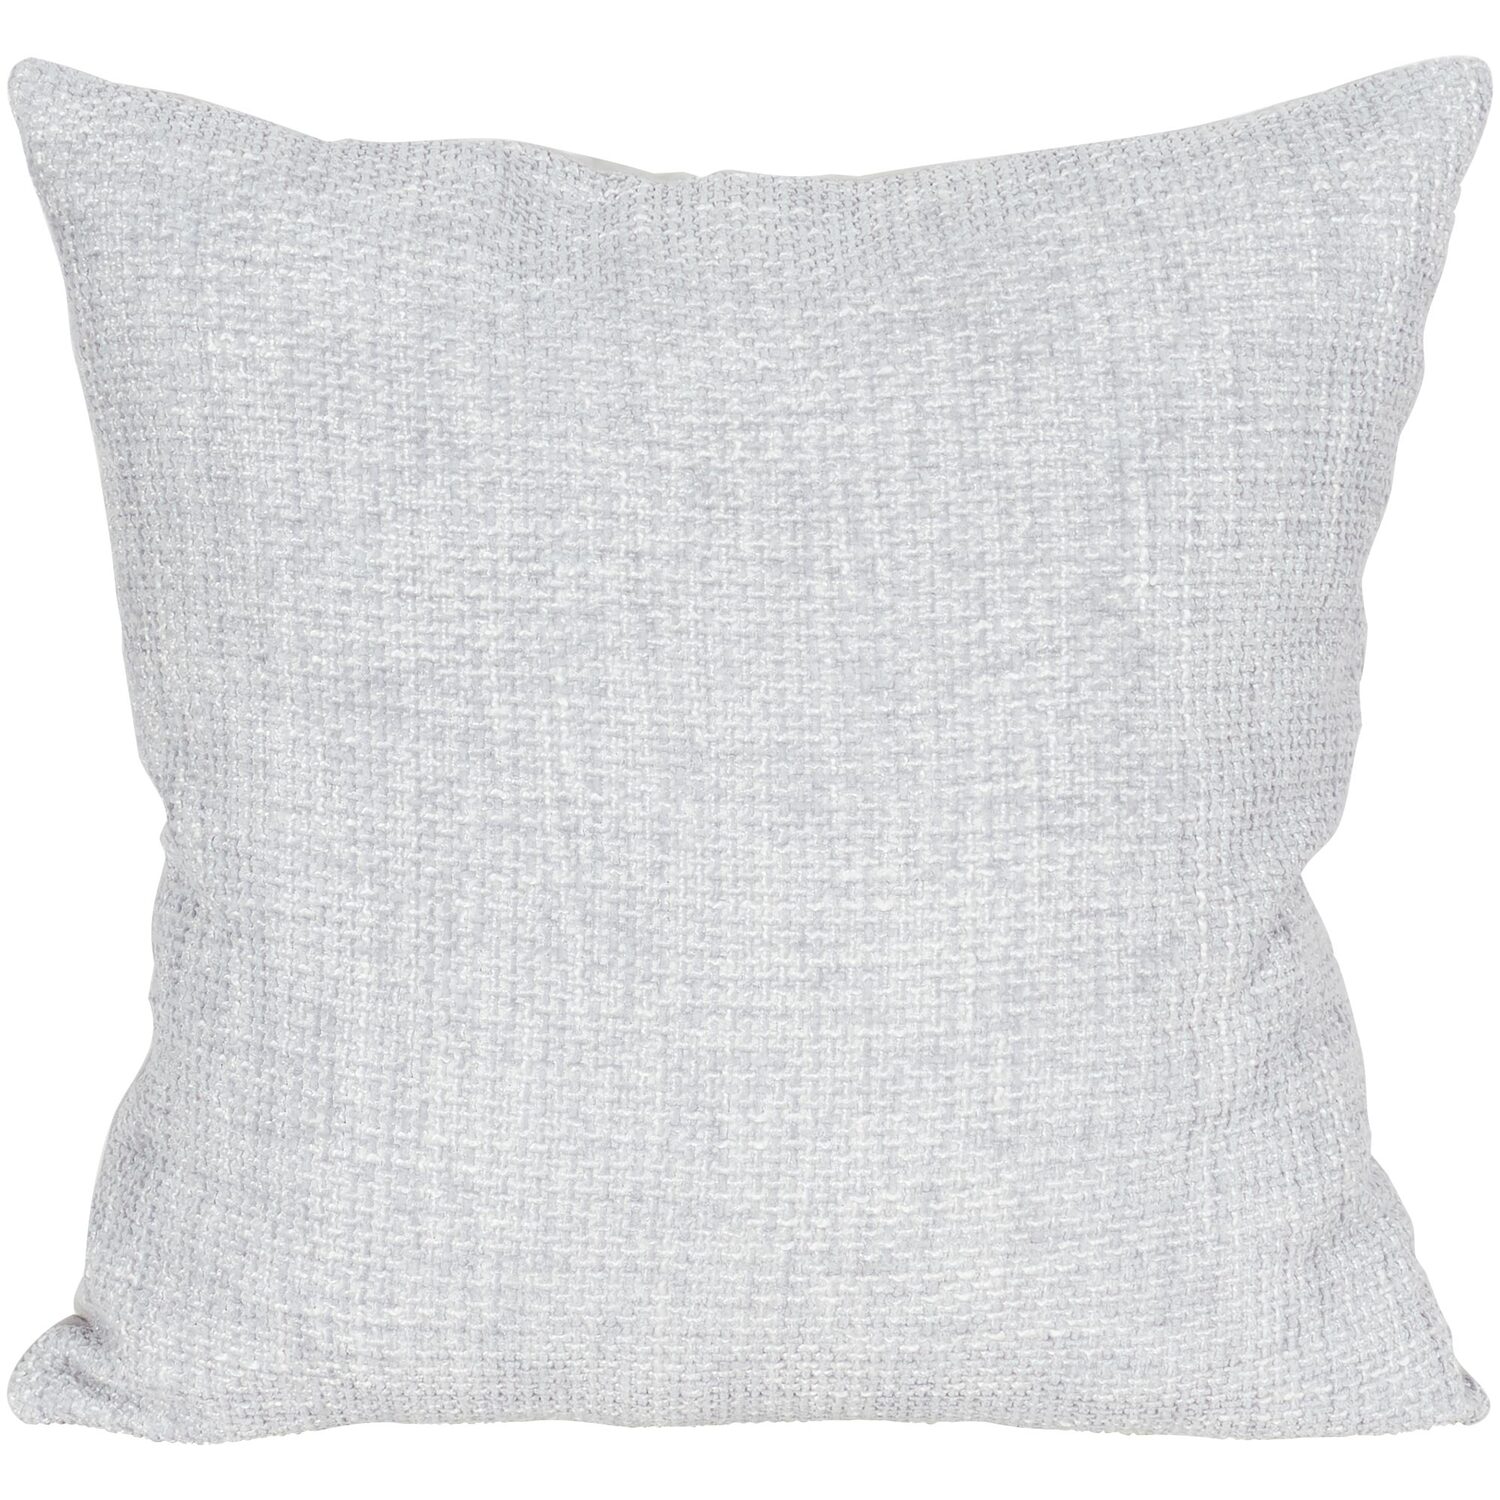 Chenille Boucle Cushion - Silver Image 1